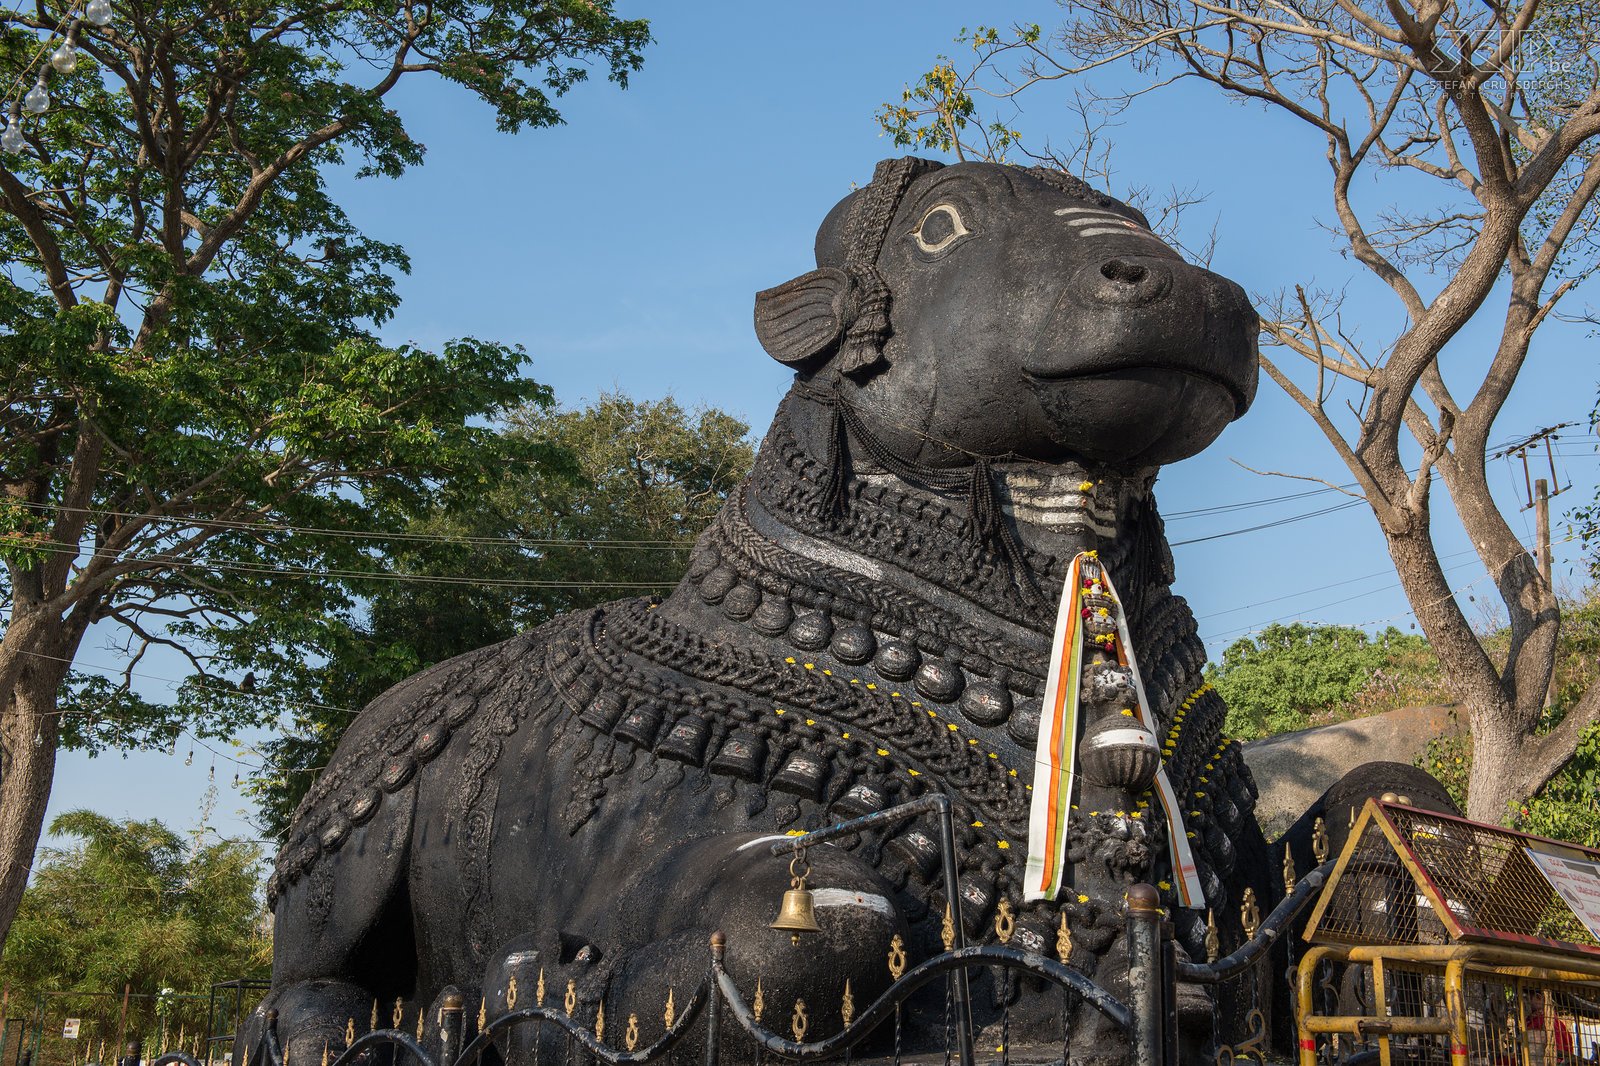 Mysore - Chumanudi hill - Nandi Halfway to the summit of Chamundi Hill there is a statue of bull Nandi. It is 4.9m tall and 7.6m long and carved out of a single piece of black granite. Stefan Cruysberghs